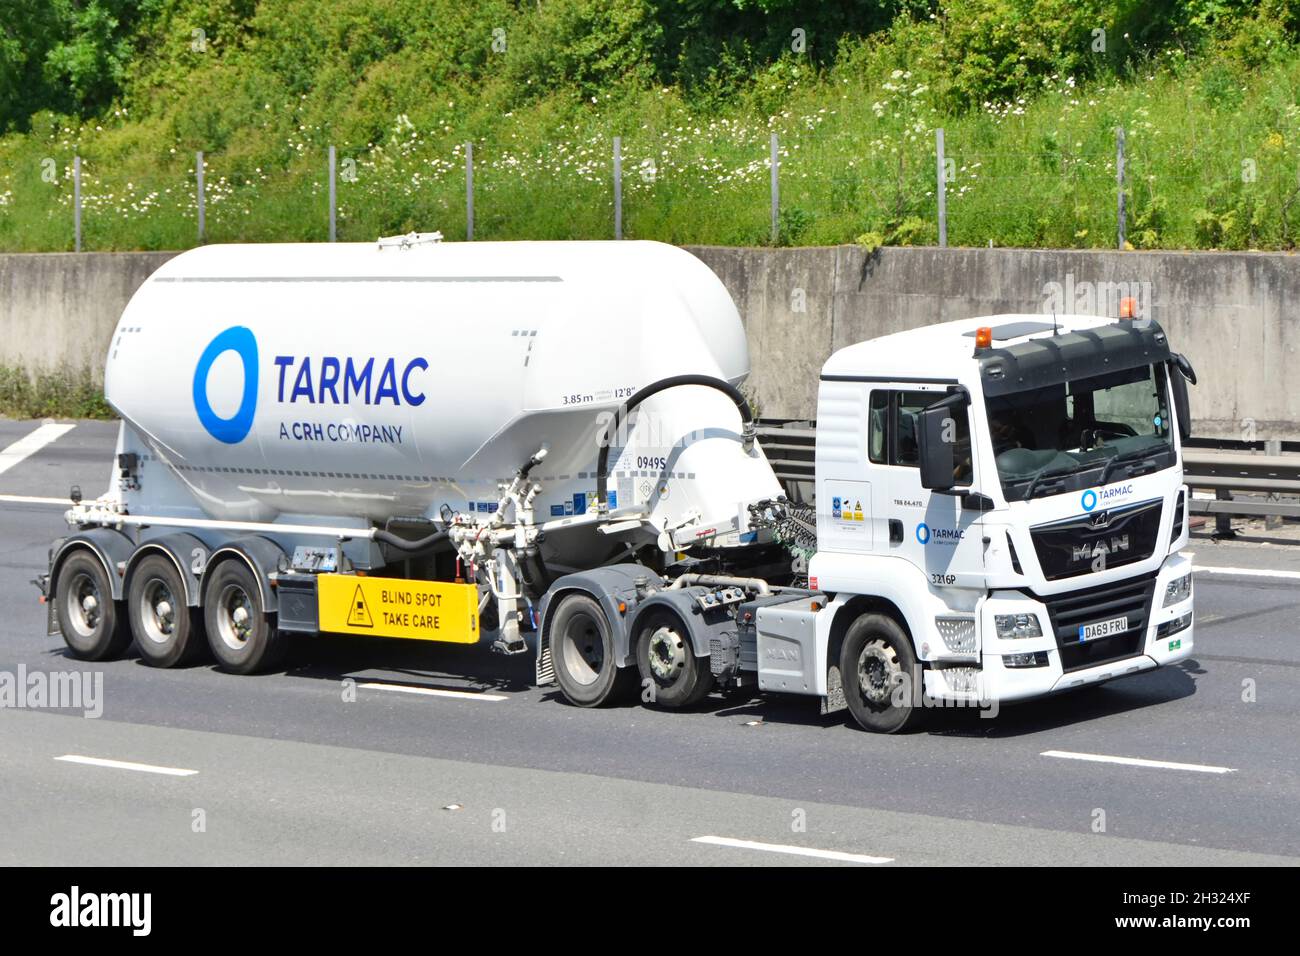 Side & front view white Tarmac hgv lorry truck & bulk cement powder delivery tanker trailer a CRH plc construction material business on UK motorway Stock Photo